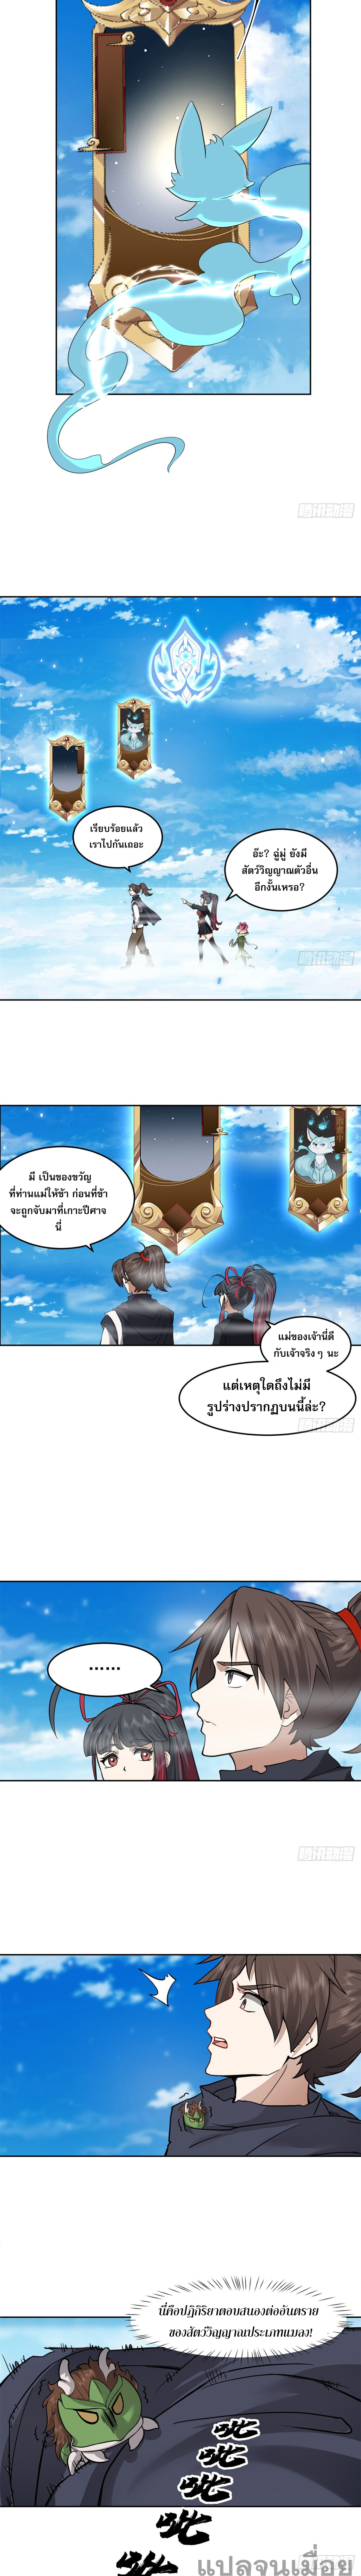 The Charm of Soul Pets (Remake) 9 (8)